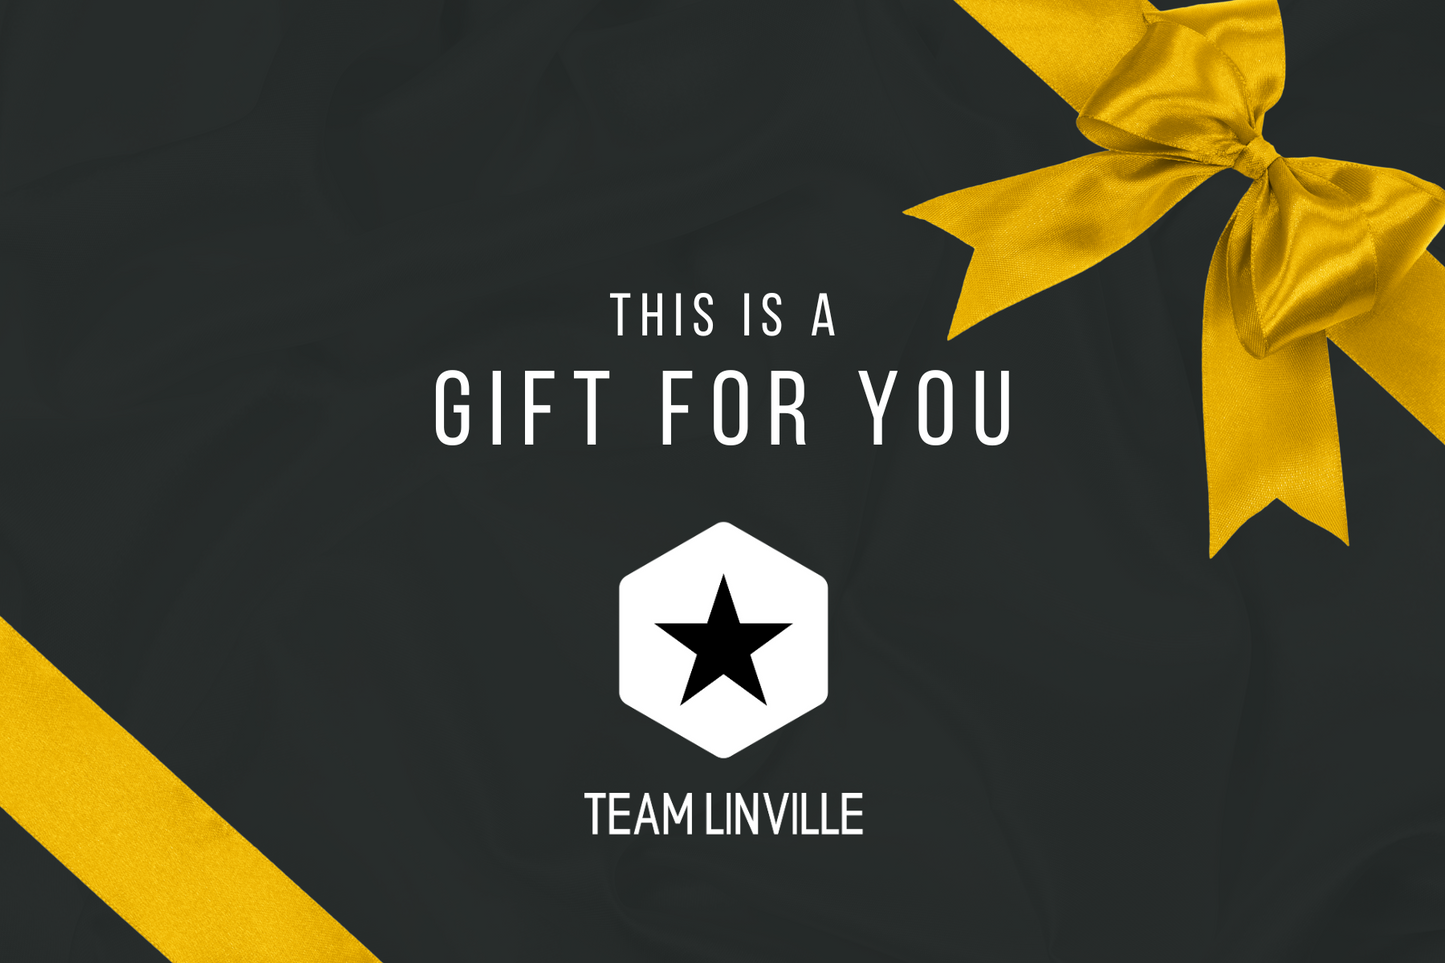 Team Linville gift card